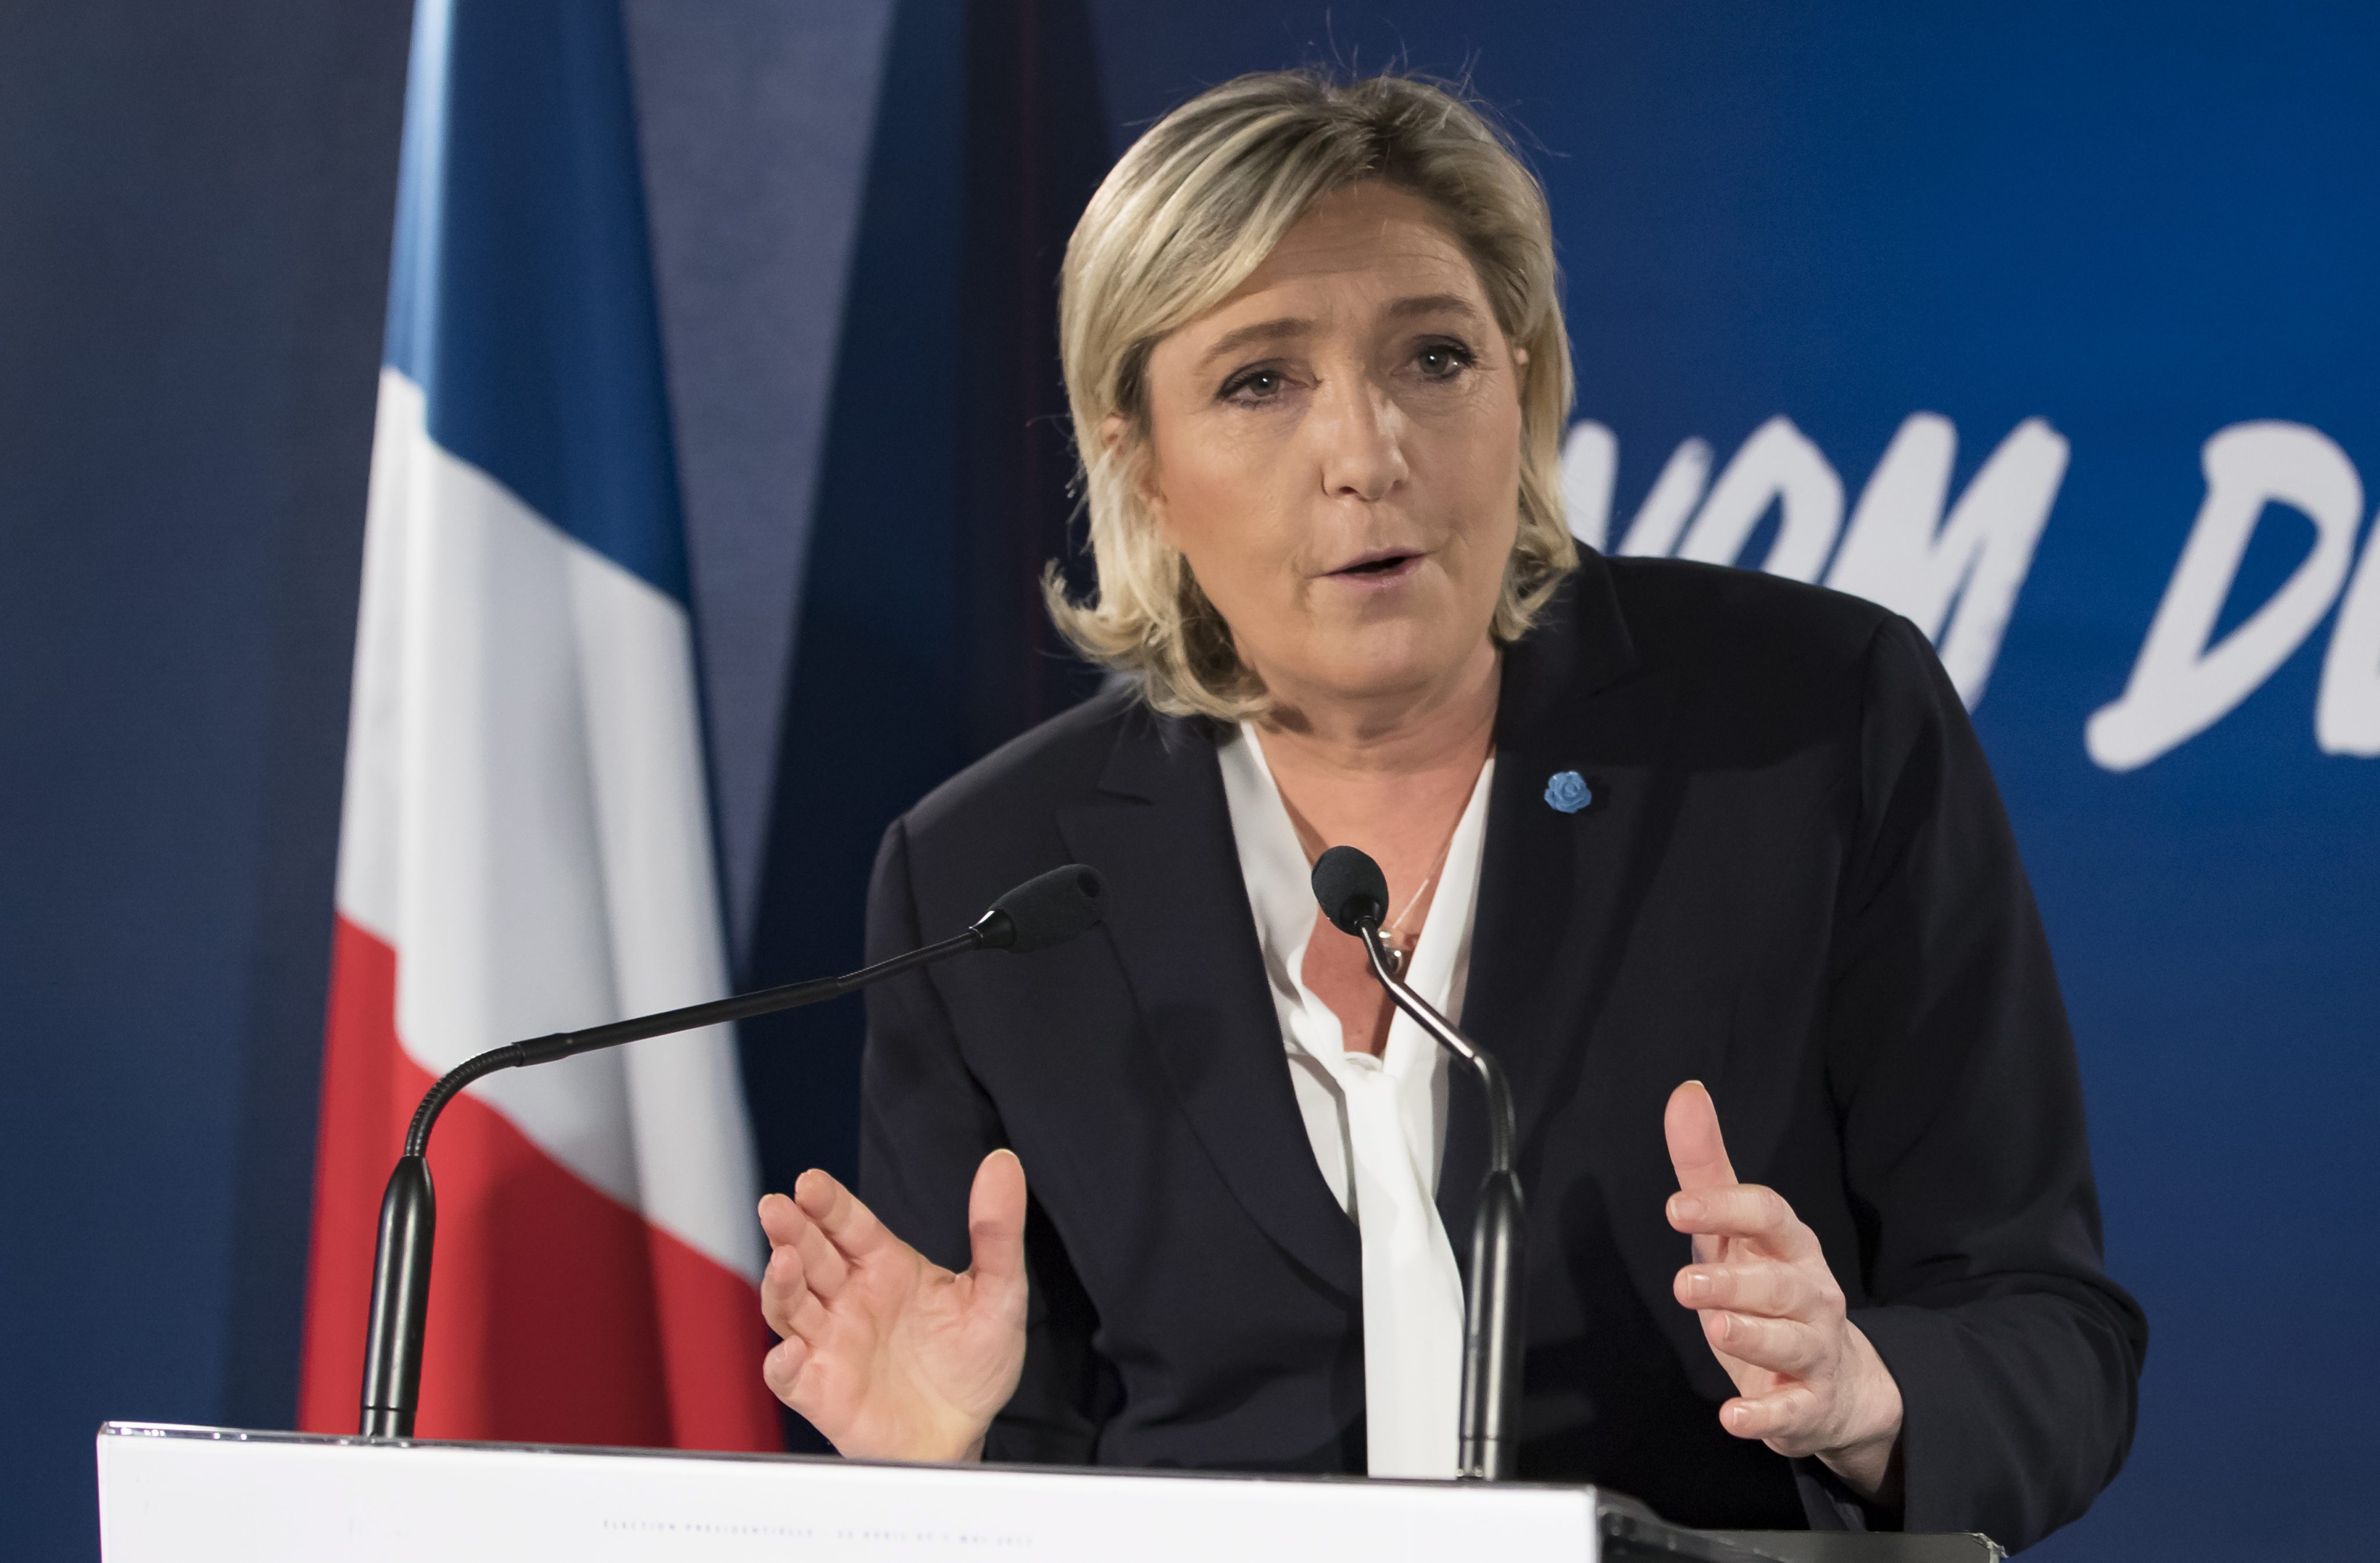 2017-01-04 12:19:21 epa05697303 Leader of France's far-right party Front National (FN) and candidate for the 2017 French Presidential election, Marine Le Pen, delivers a statement on her new year wishes to the press at her campaign headquarters in Paris, France, 04 January 2017. The 2017 presidential elections will be held on 23 April and 07 May 2017. EPA/IAN LANGSDON